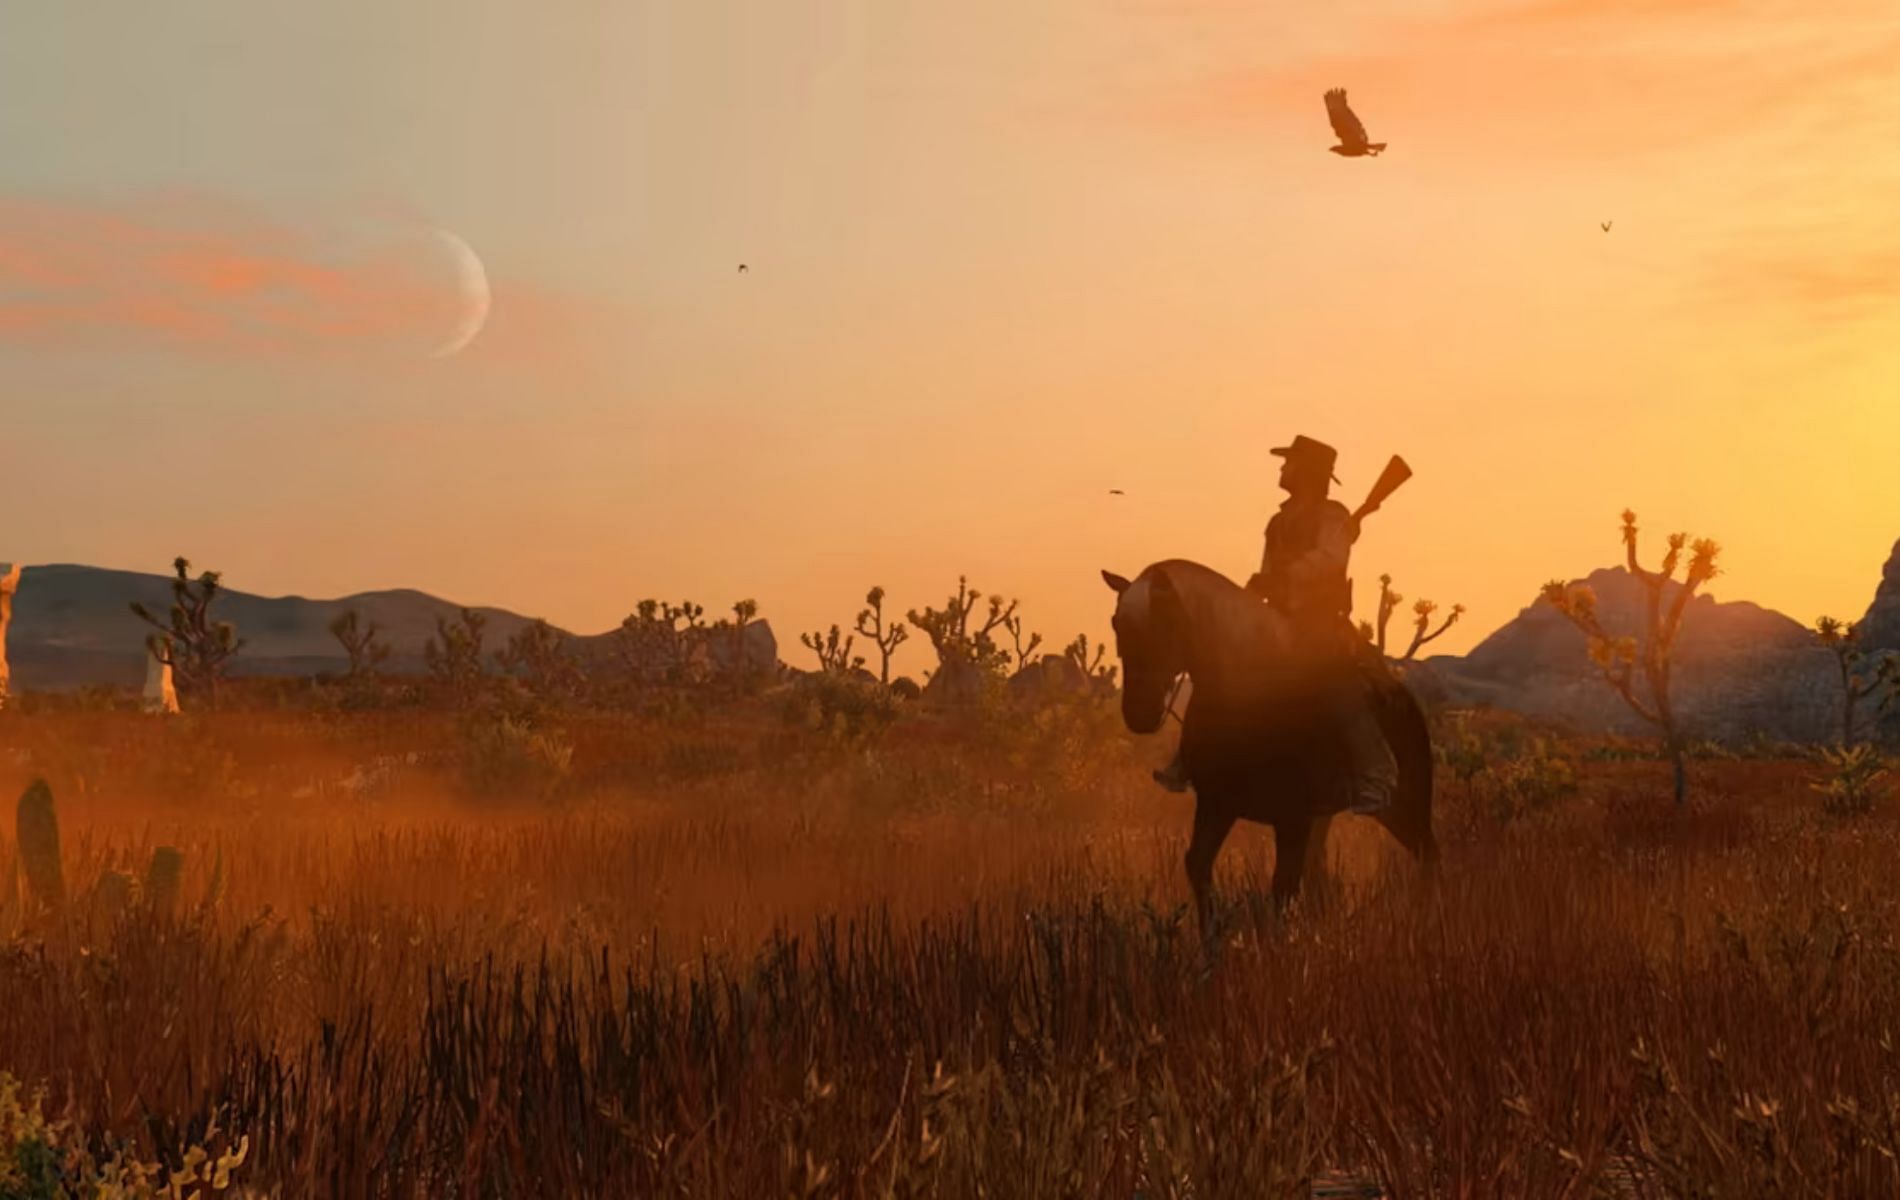 Red Dead Redemption Port, Not Remaster, Announced